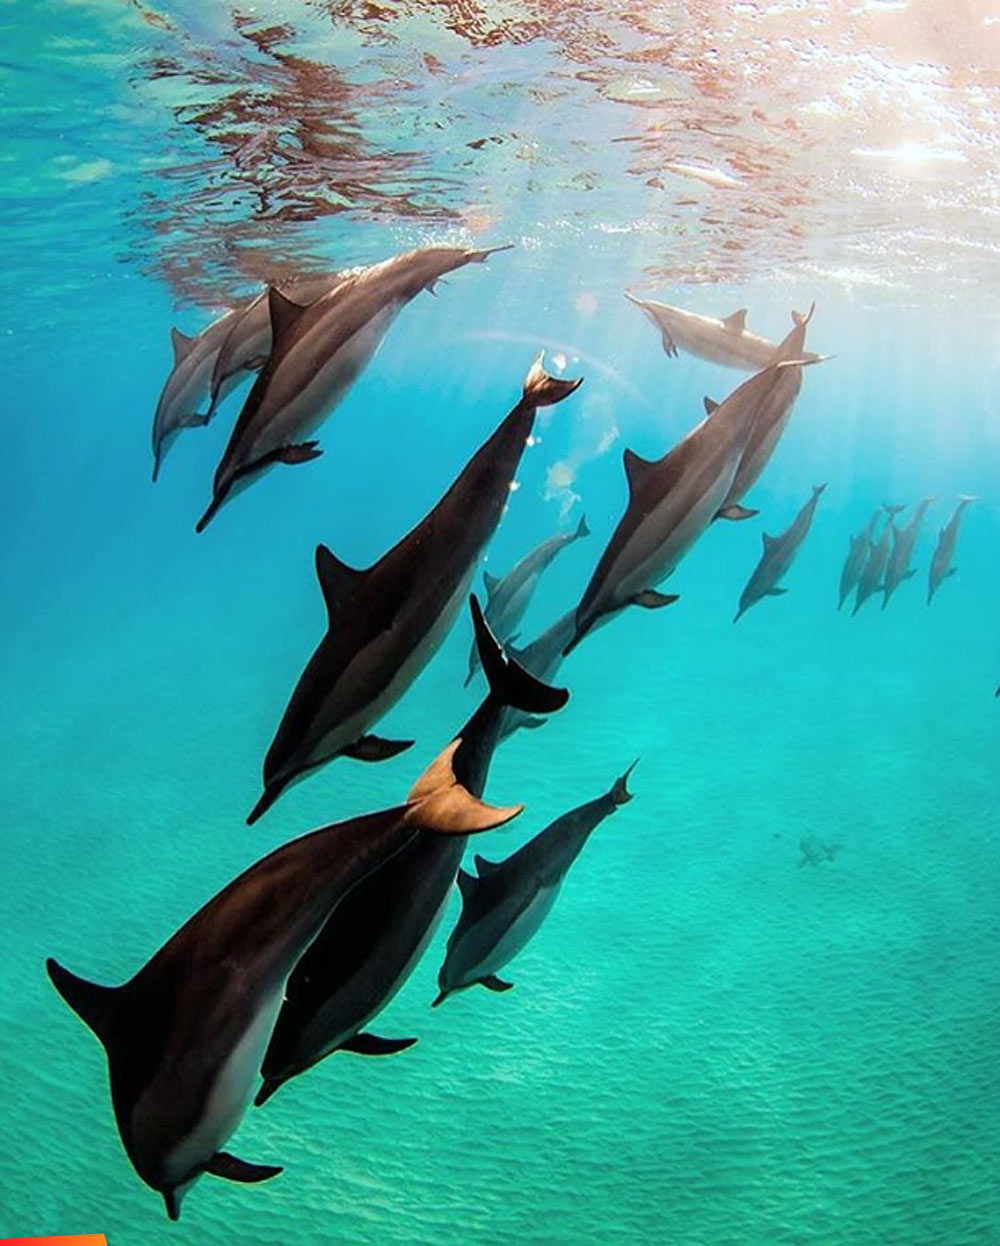 Big group of spinner dolphins